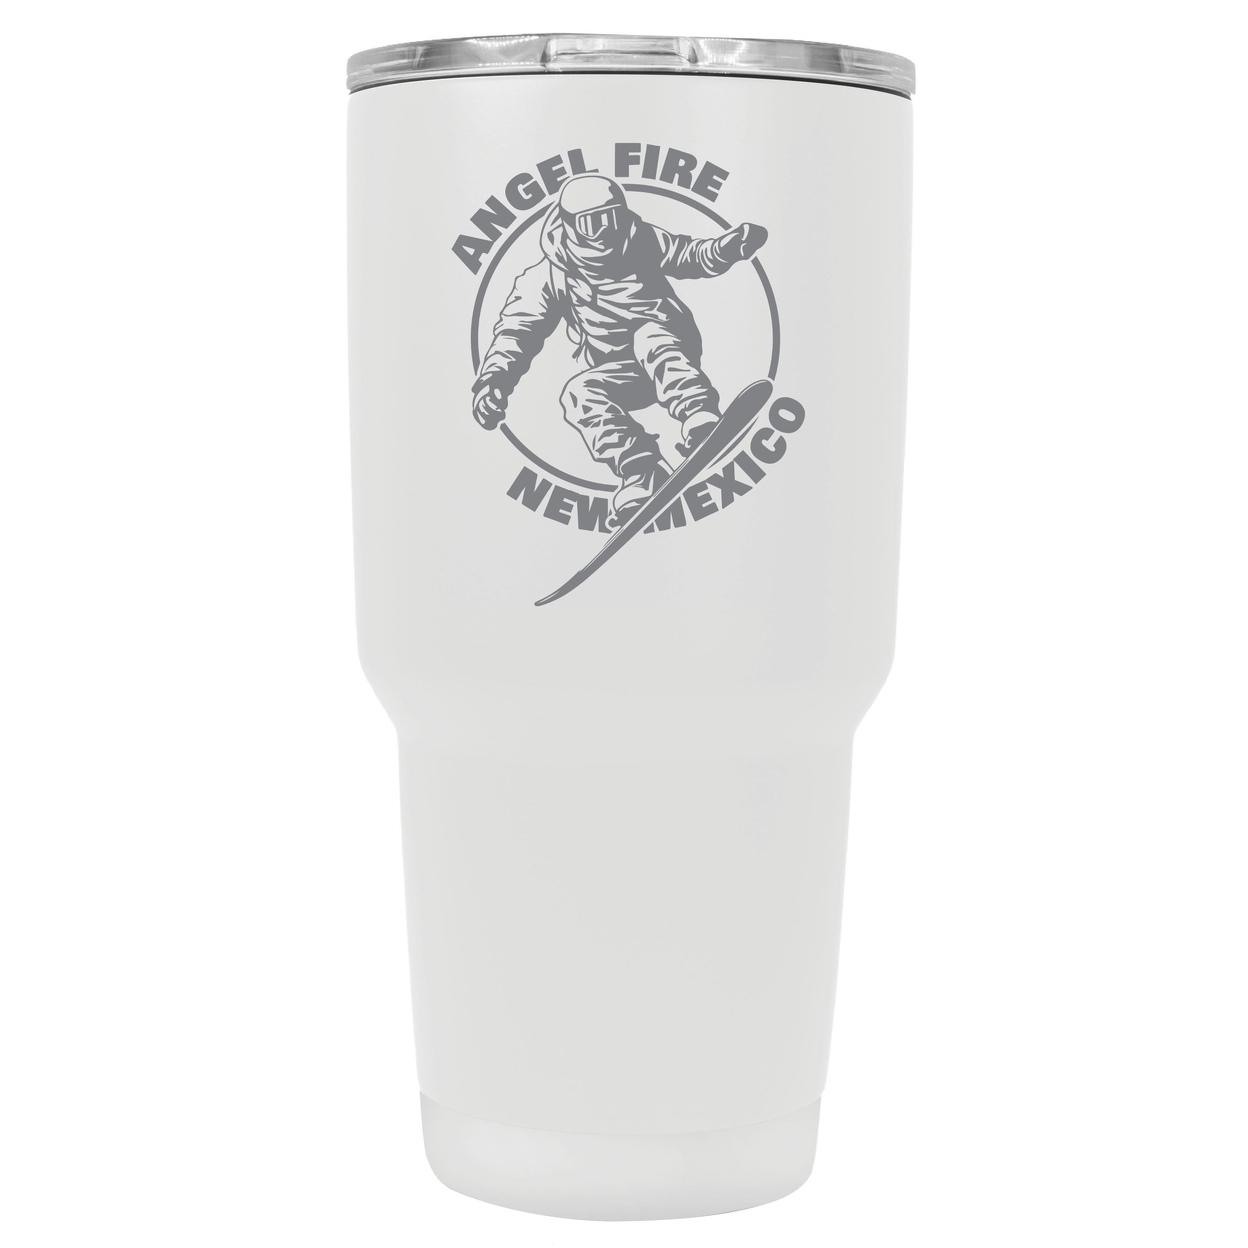 Angel Fire New Mexico Souvenir 24 Oz Engraved Insulated Stainless Steel Tumbler - Rose Gold,,Single Unit